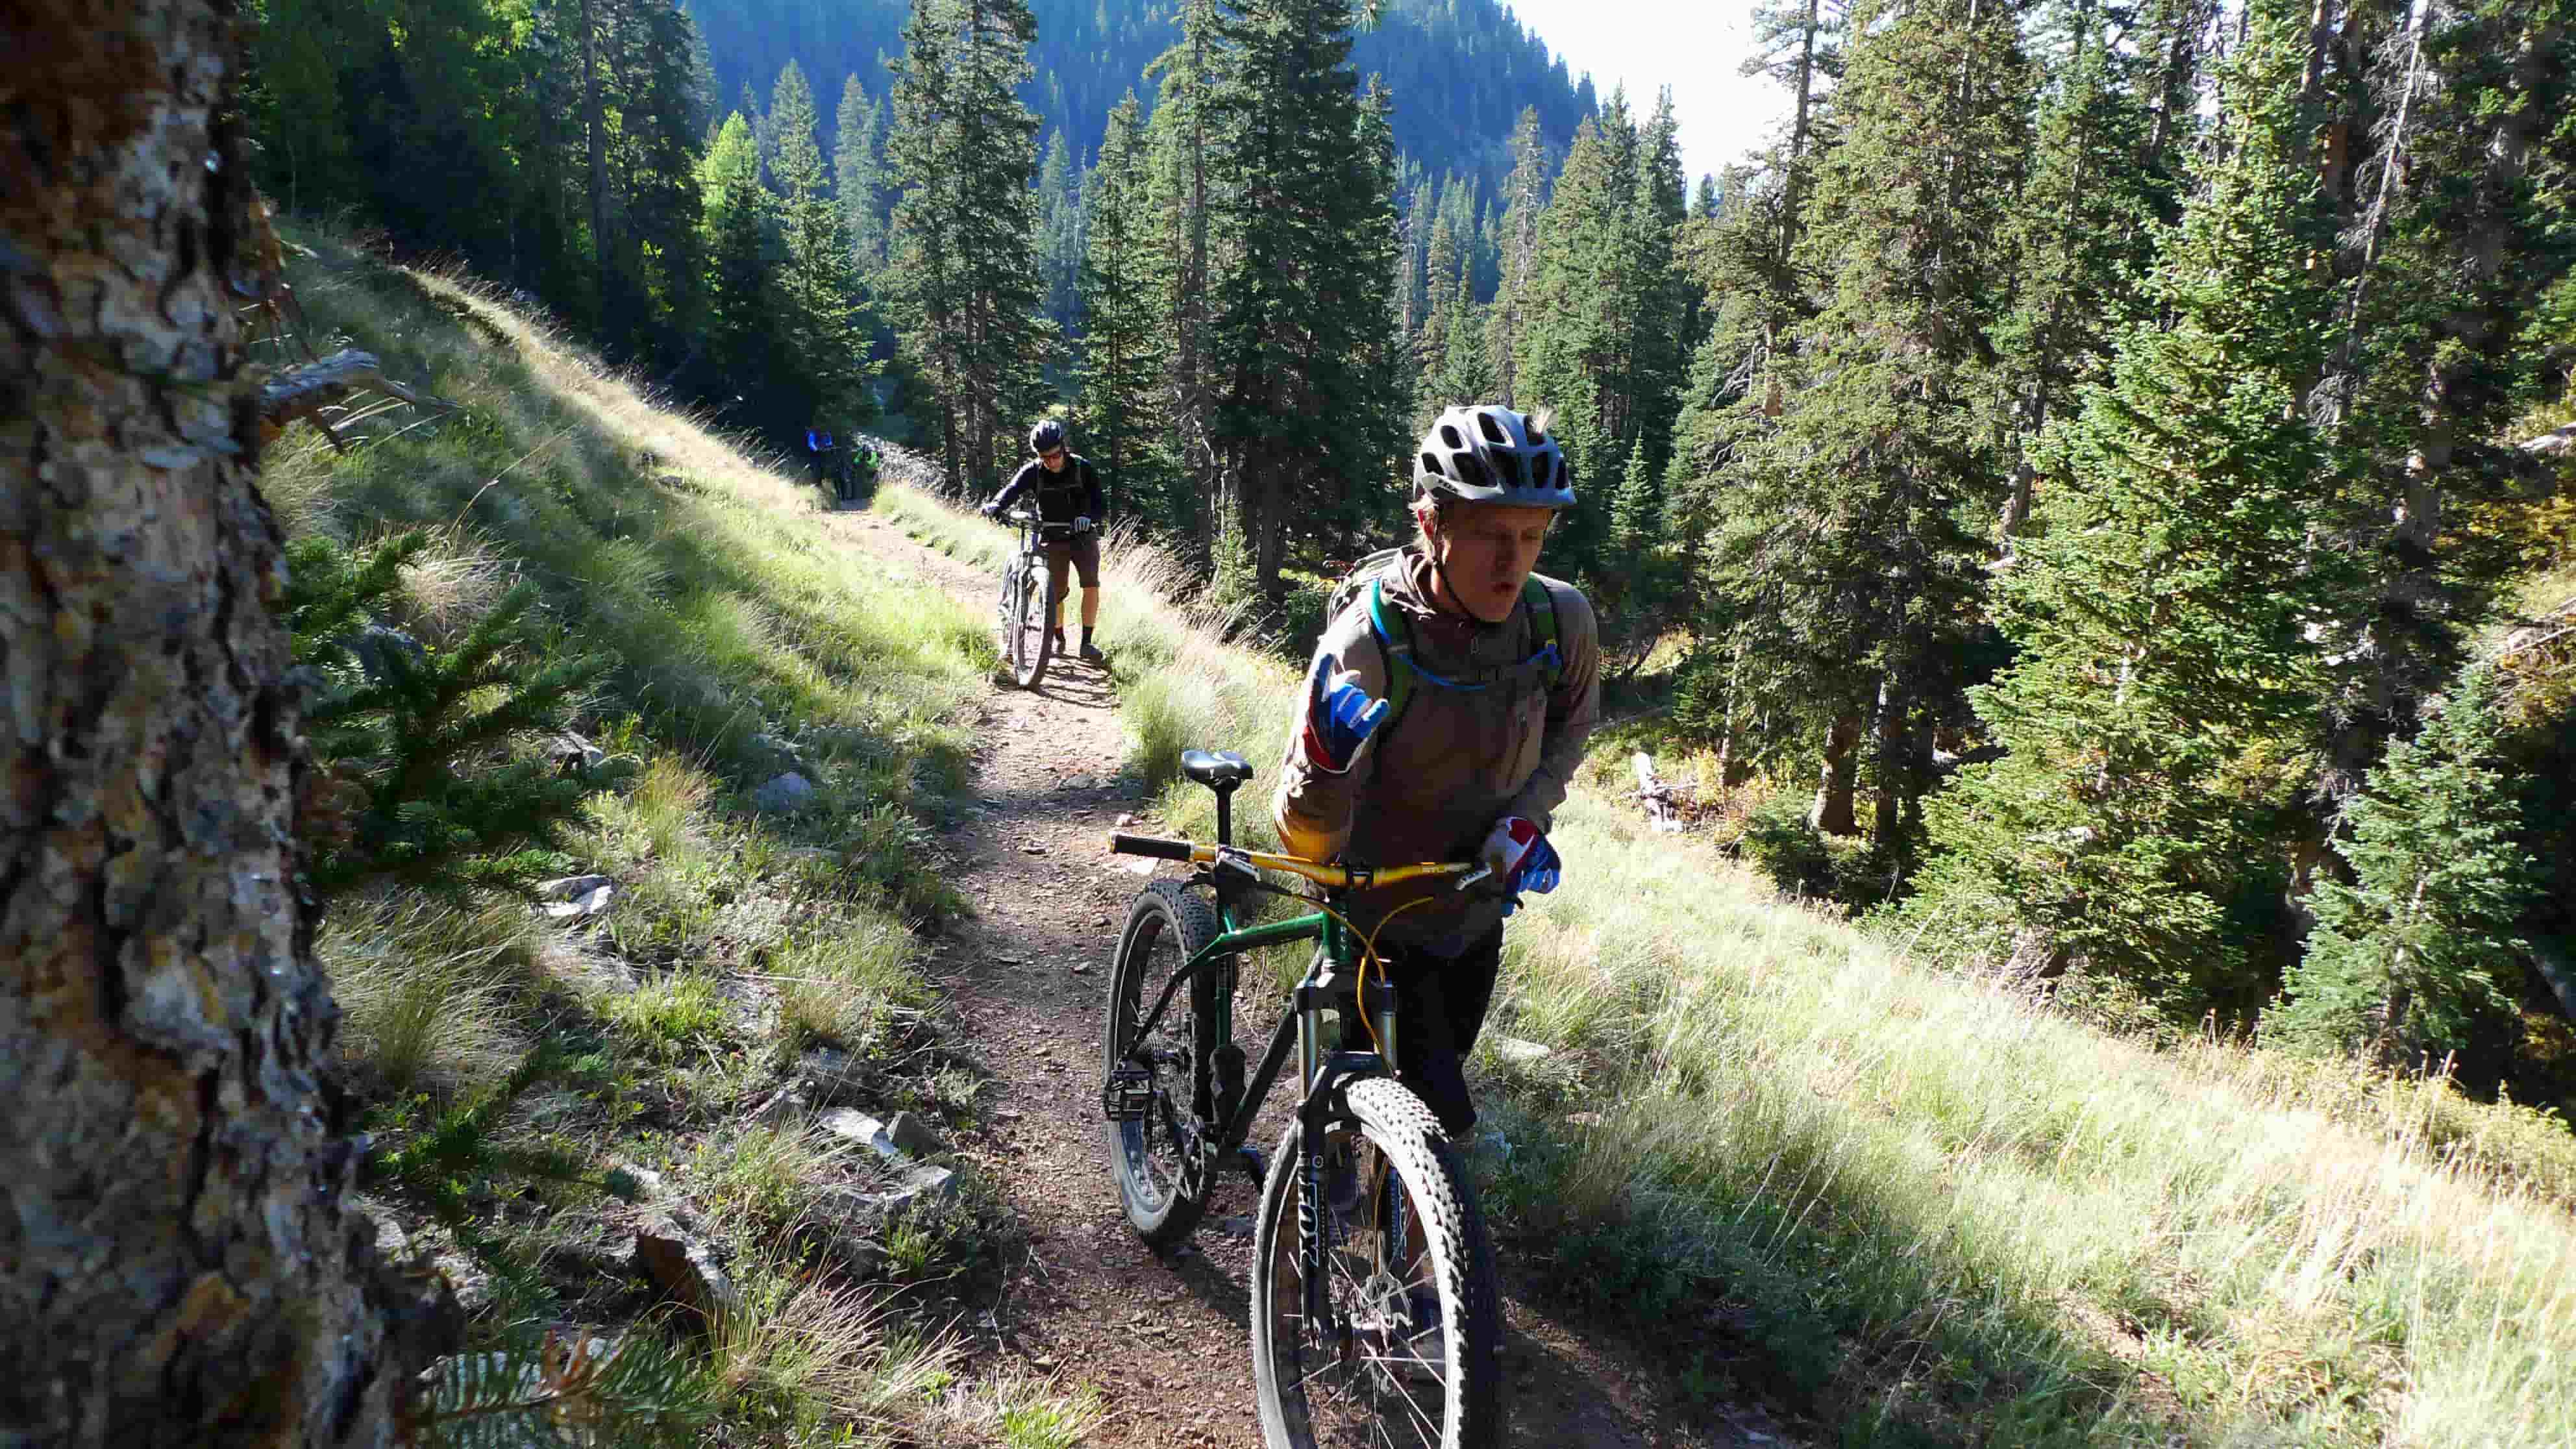 Front, right side view of 2 cyclists, walking their Surly bikes on a dirt trail, up a tree covered mountain hill